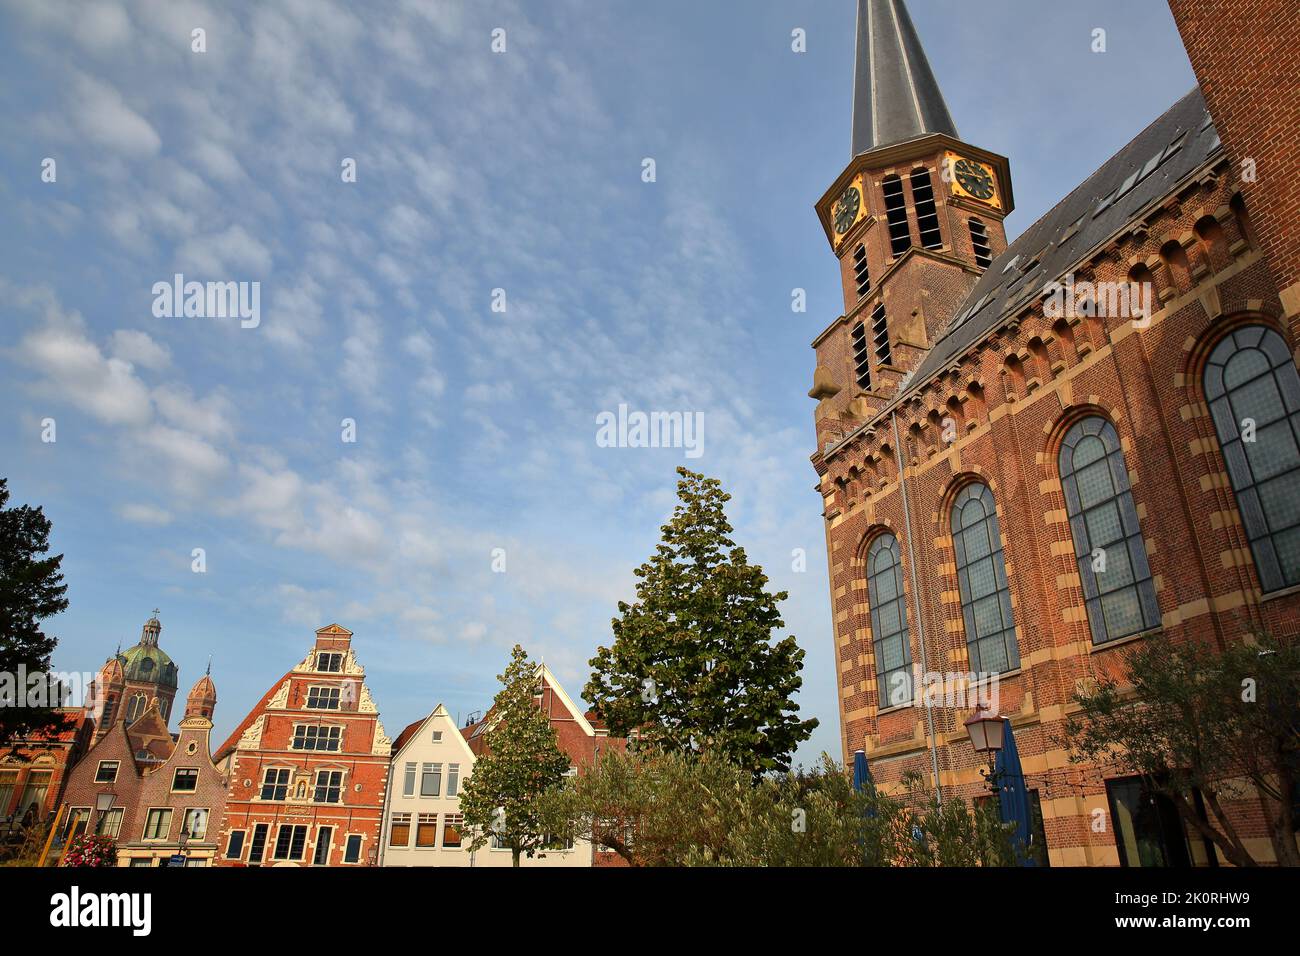 The Grote kerk church (on the right) and historic houses (Boterhal and the Dome of Koepelkerk church) in Hoorn, West Friesland, Netherlands Stock Photo